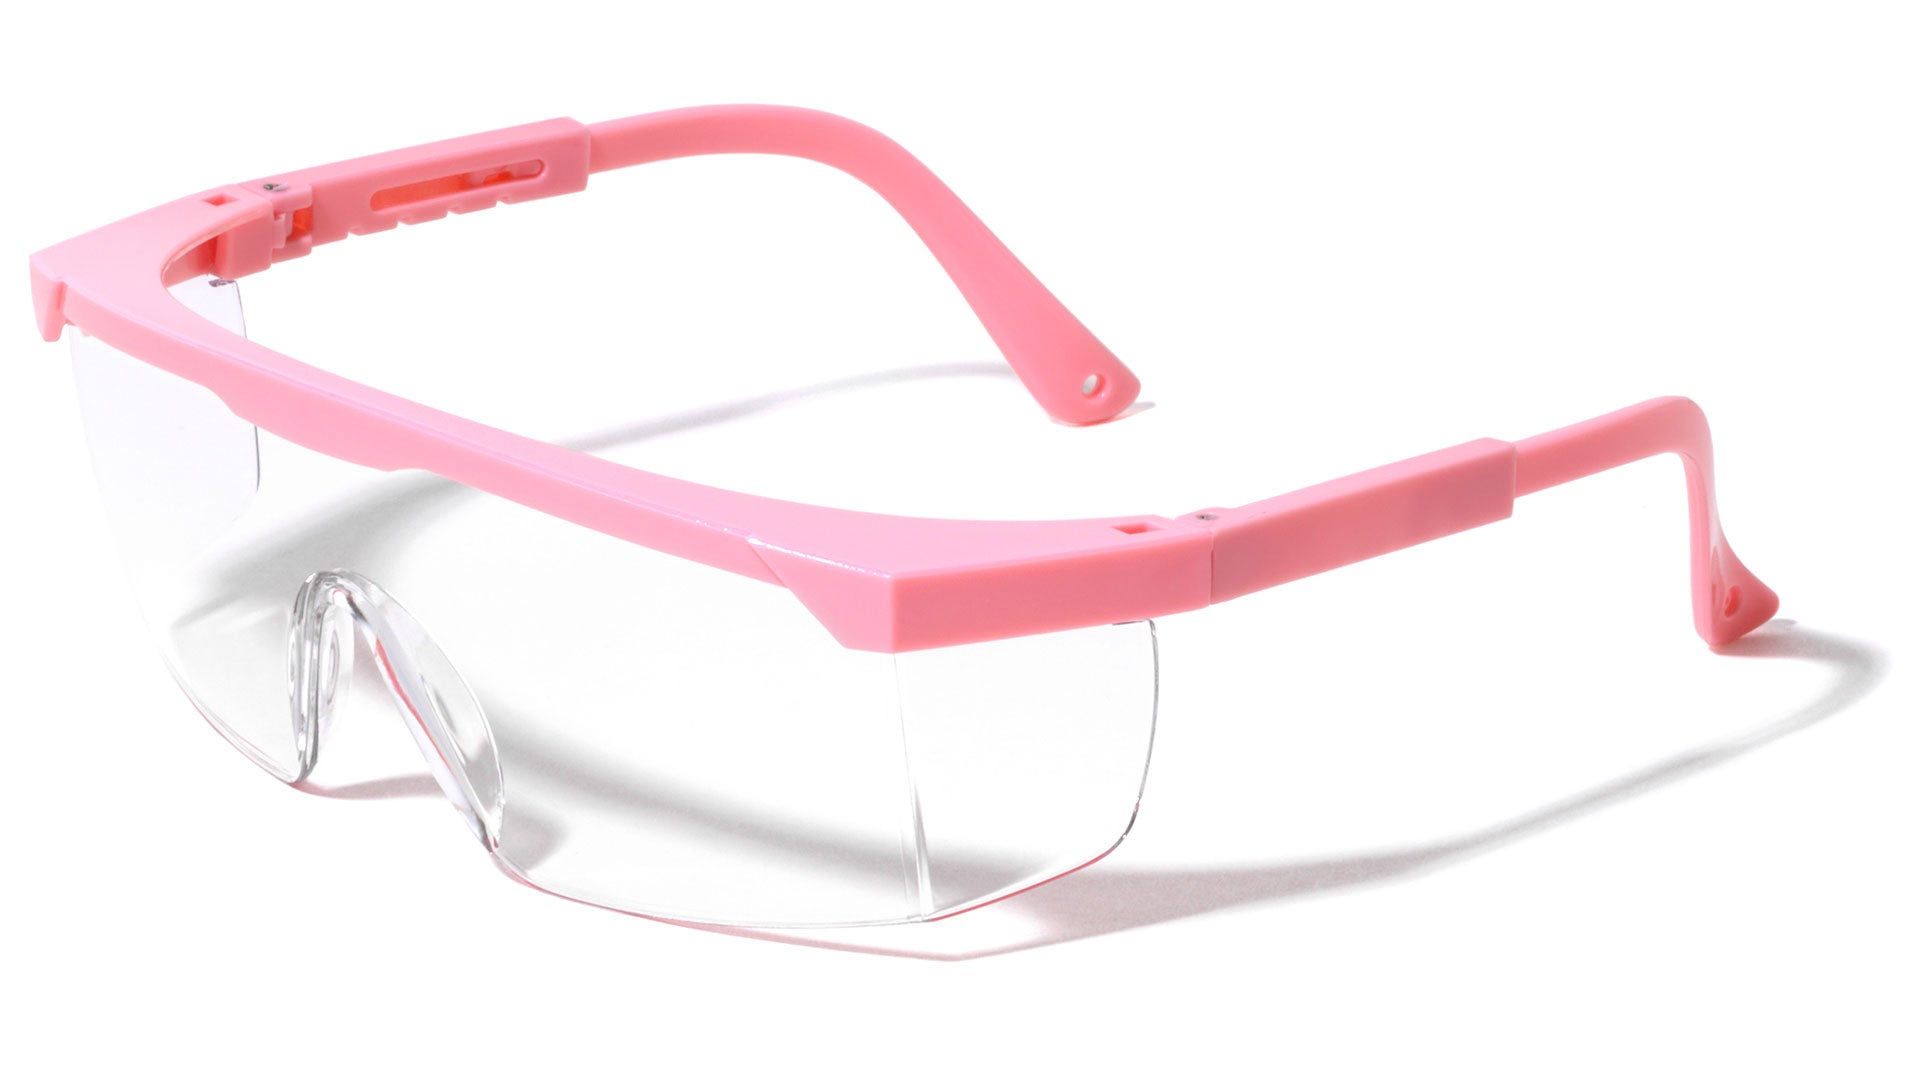 Safeguarding Young Eyes: The Importance of Kids’ Safety Glasses